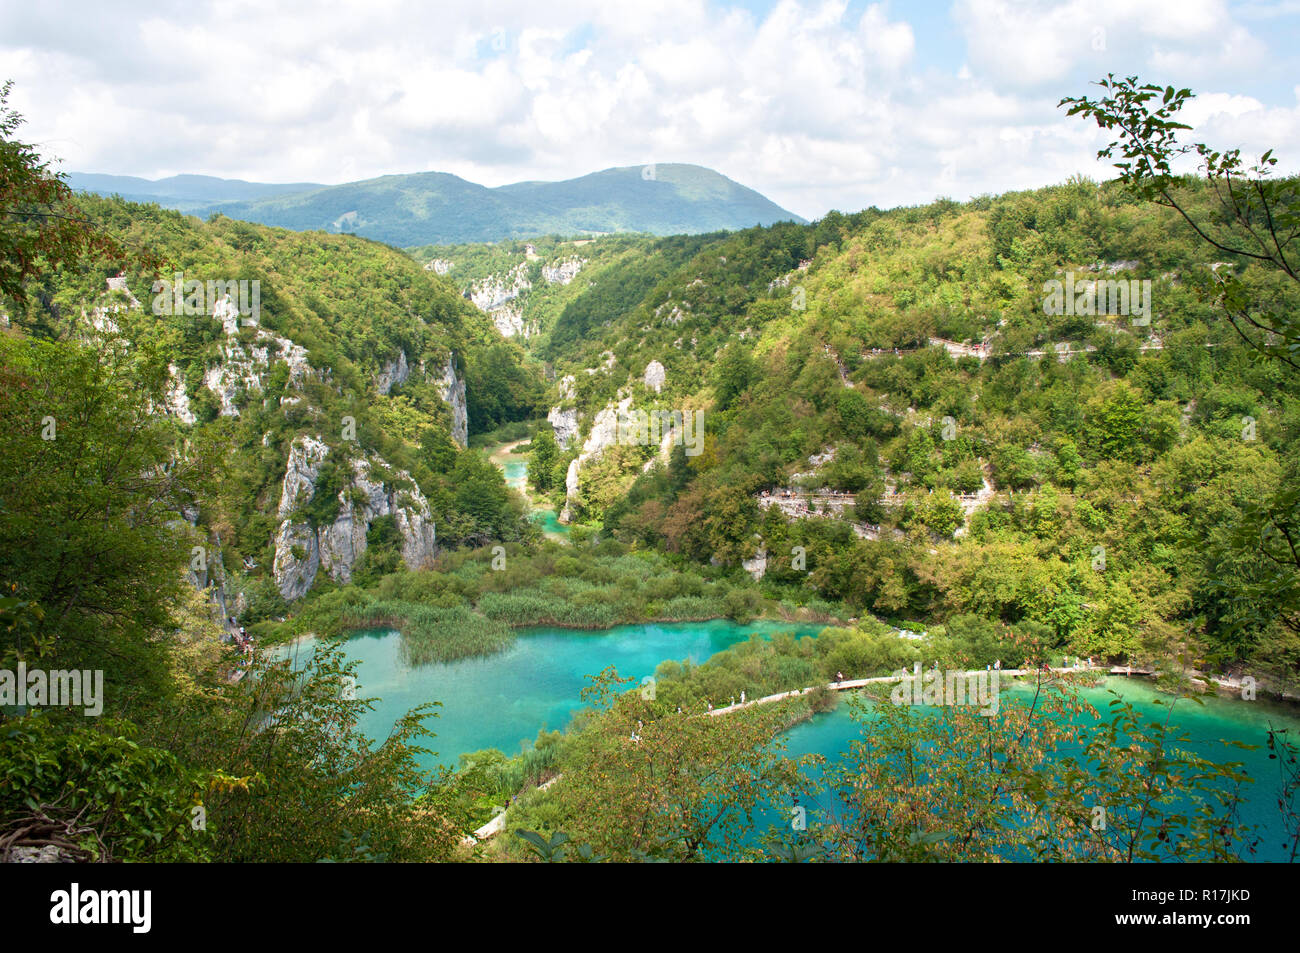 Lower lakes canyon. Hiking path meandering between two lakes with turquoise water. View from above. Plitvice lakes national park, Croatia Stock Photo